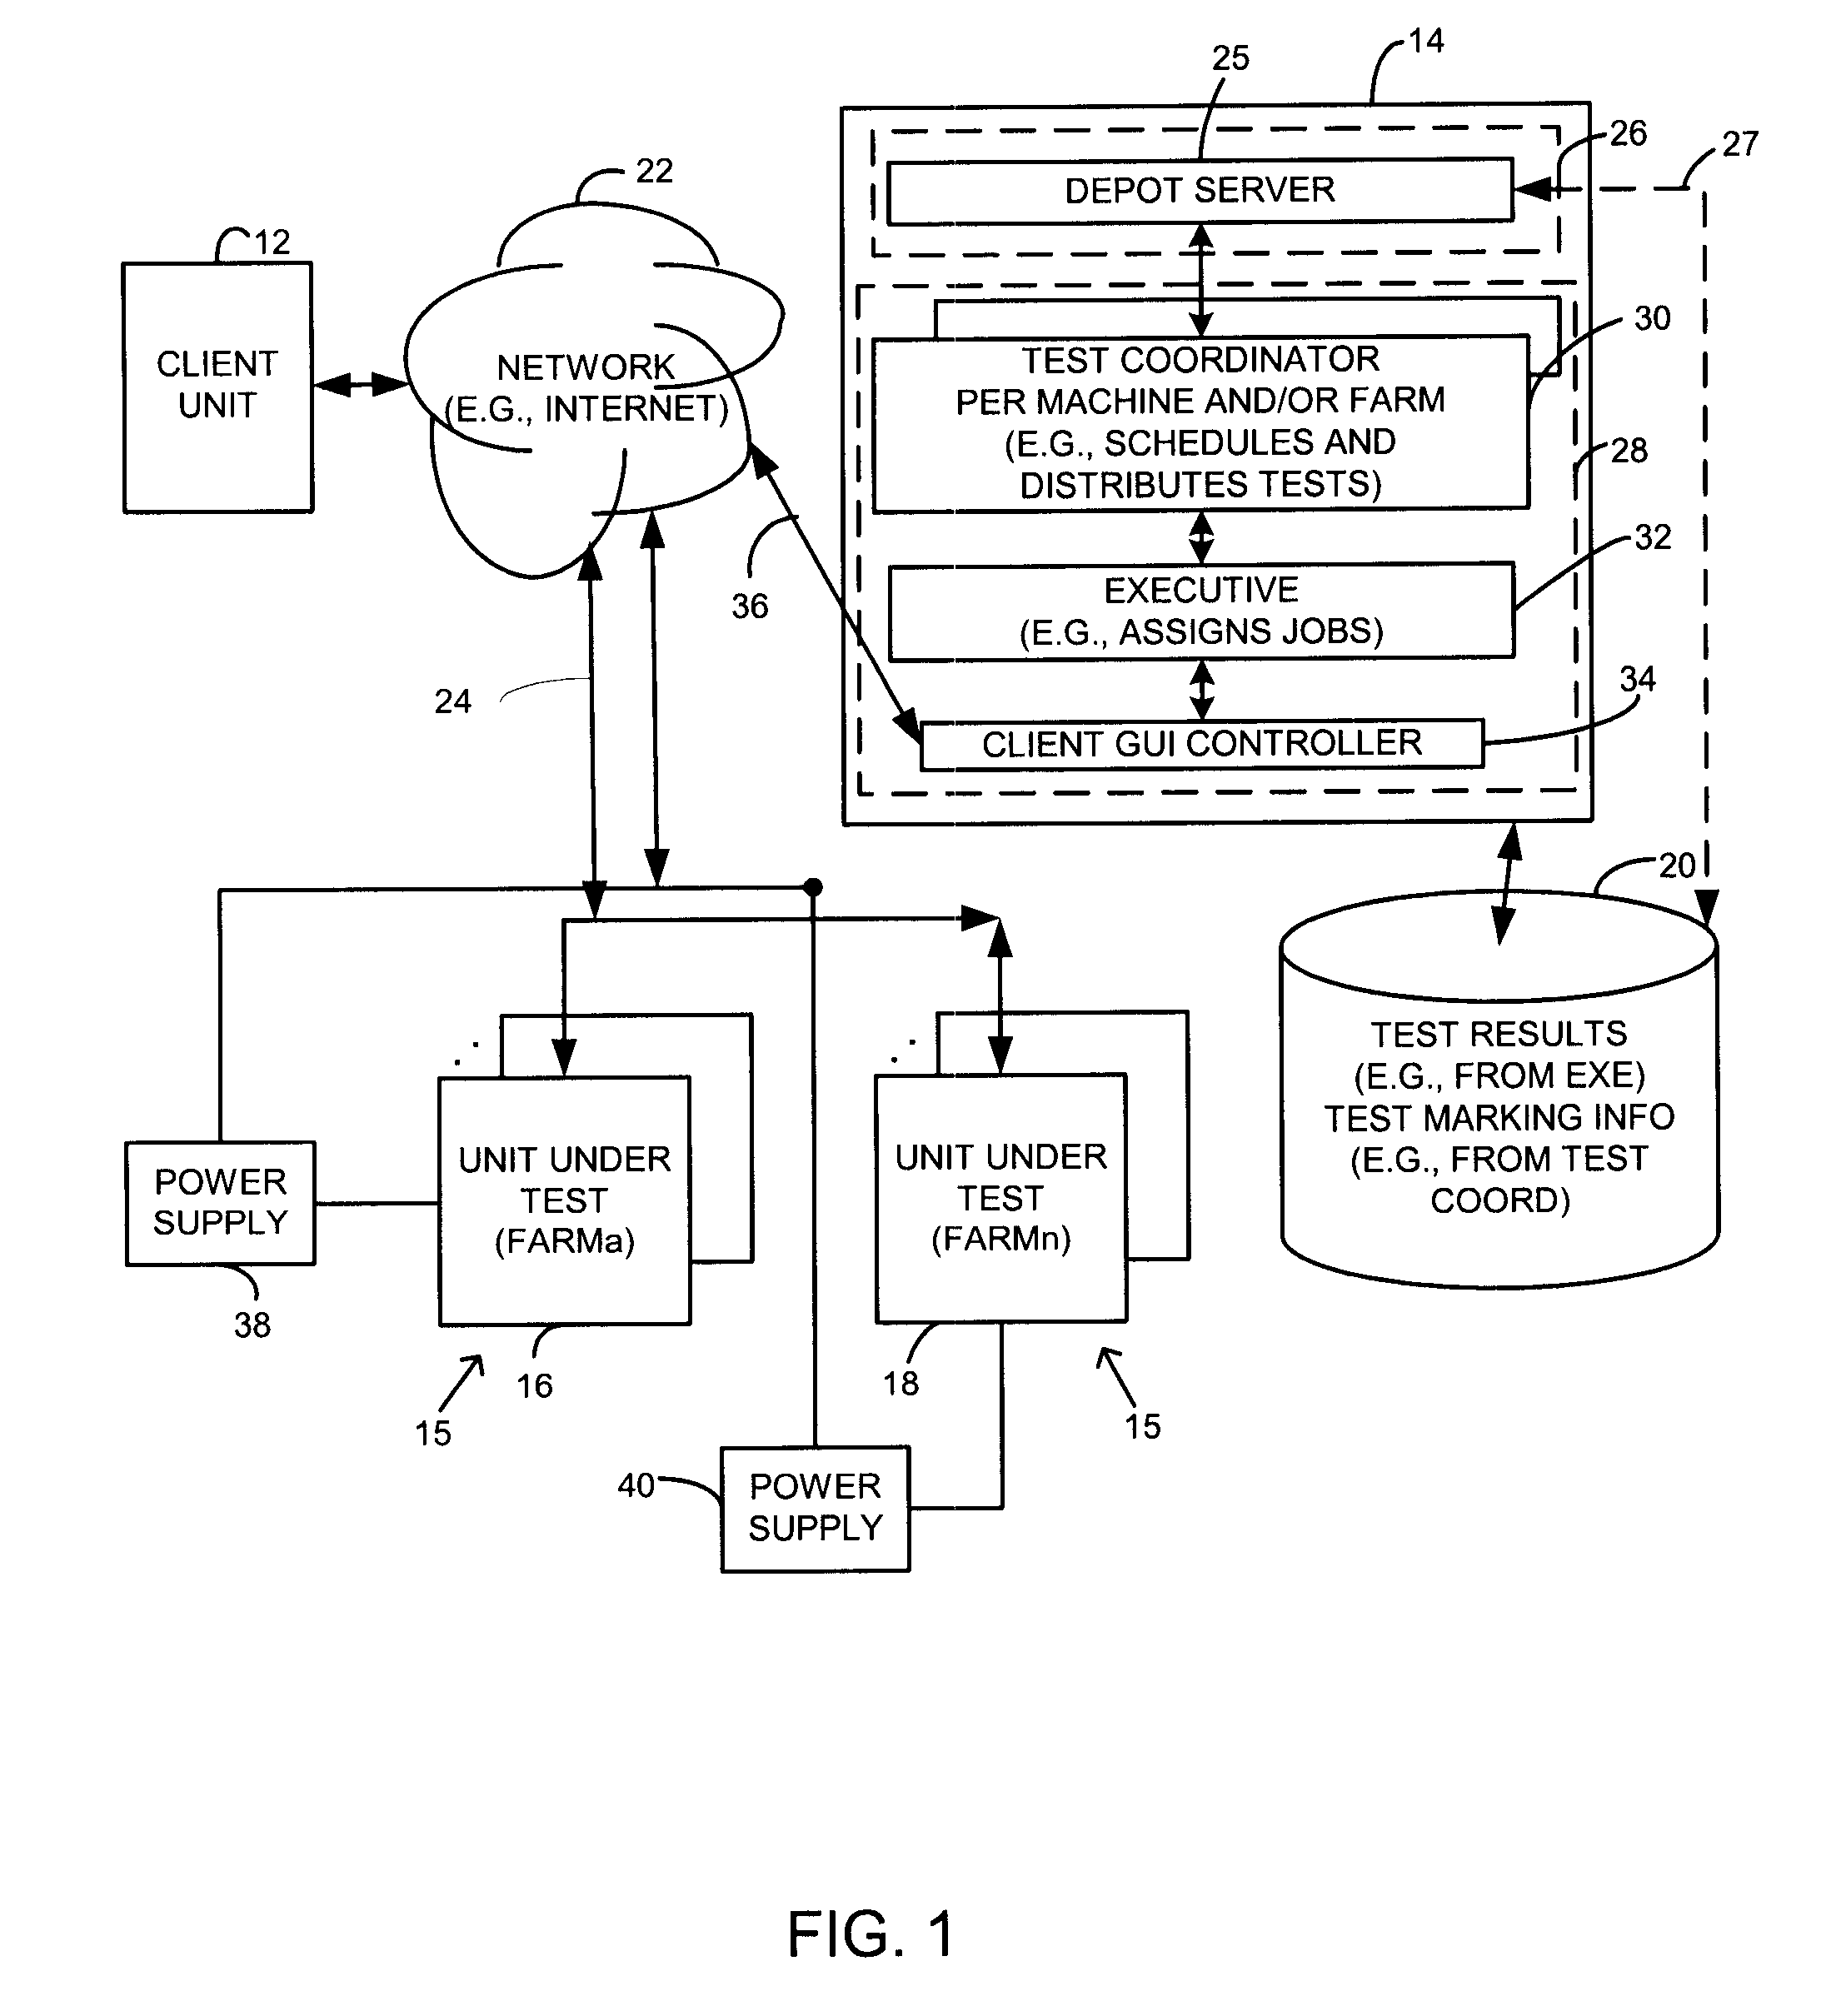 Software or hardware test apparatus and method